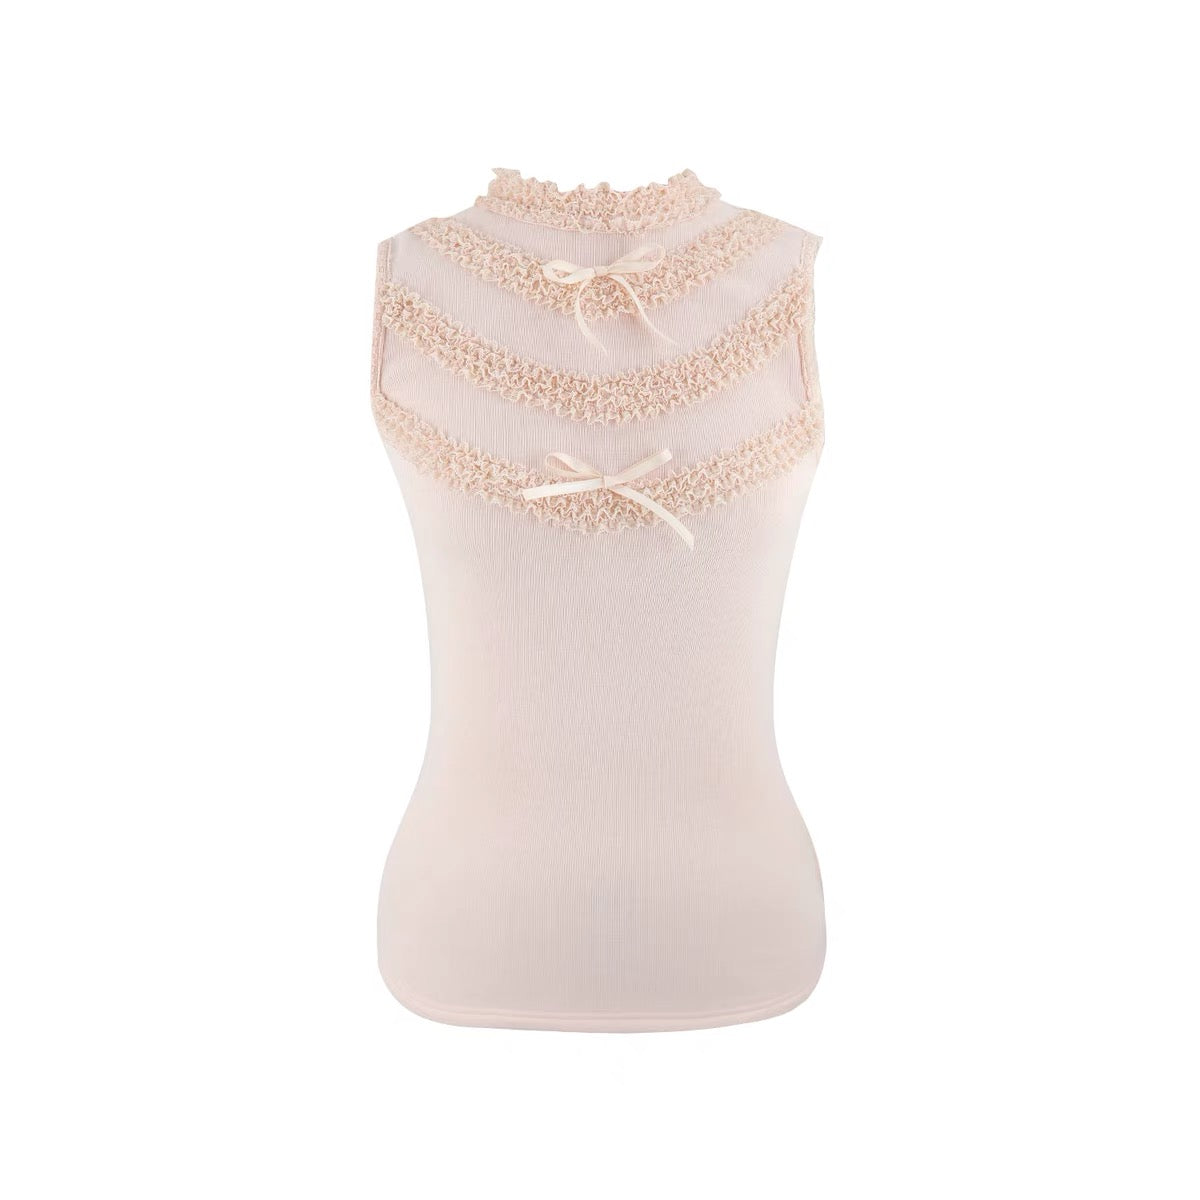 Mummy Cat. Girly Bow Lace Stretch Knit Top